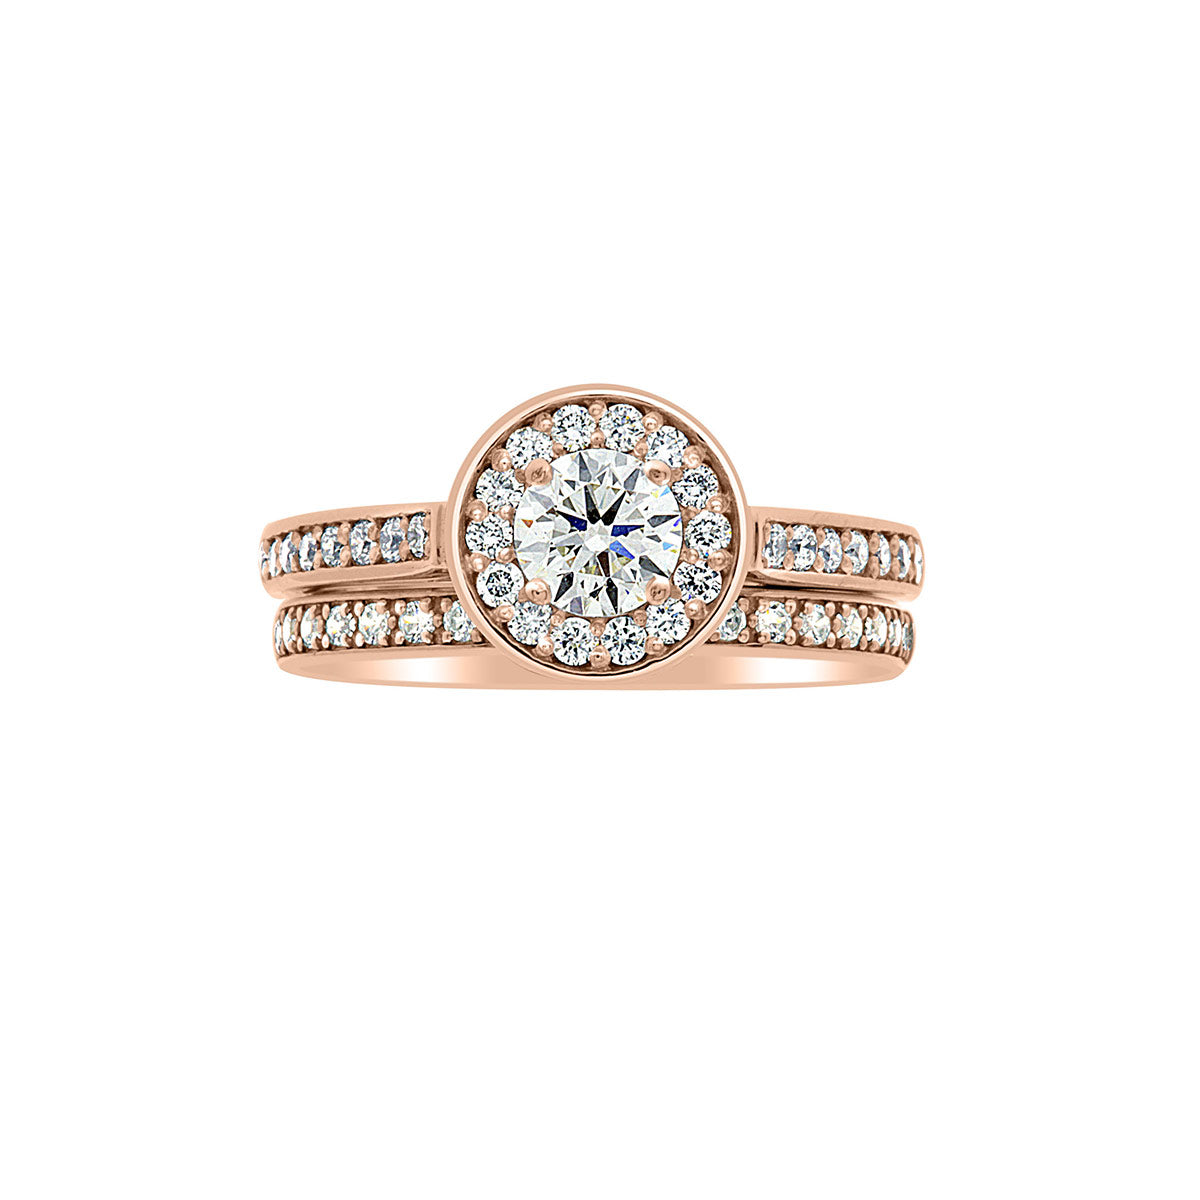 Round Halo Engagement Ring in rose gold with a matching diamond wedding band